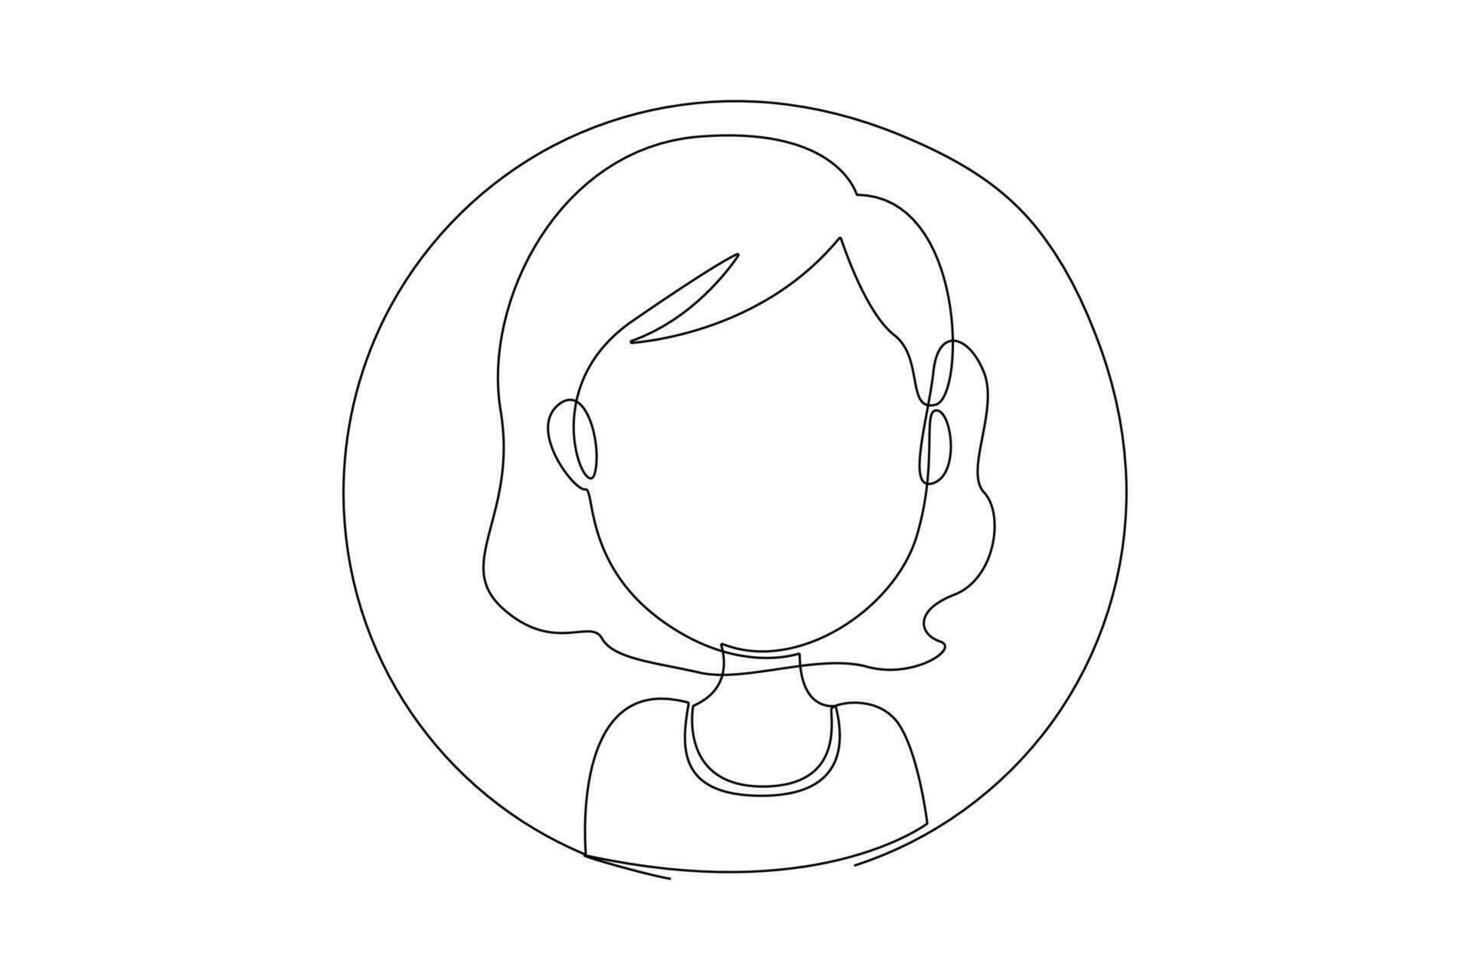 Continuous one line drawing People avatars with people's faces concept. Doodle vector illustration.